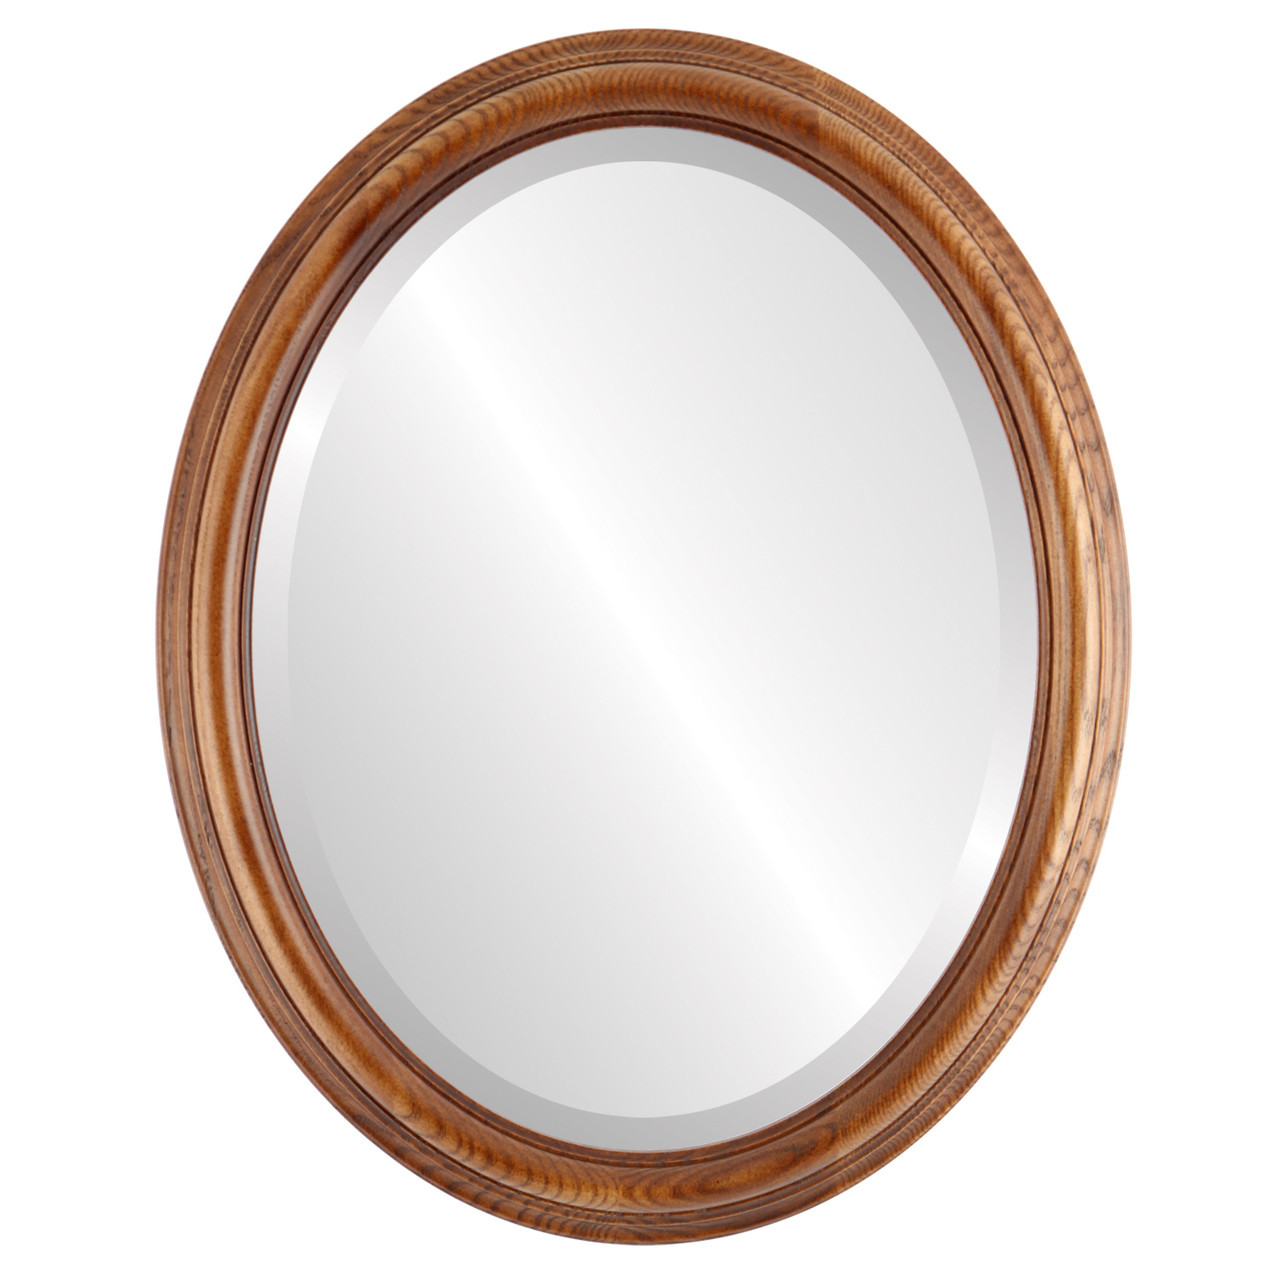 Brown Oval Mirrors From 120 Melbourne Toasted Oak Free Shipping